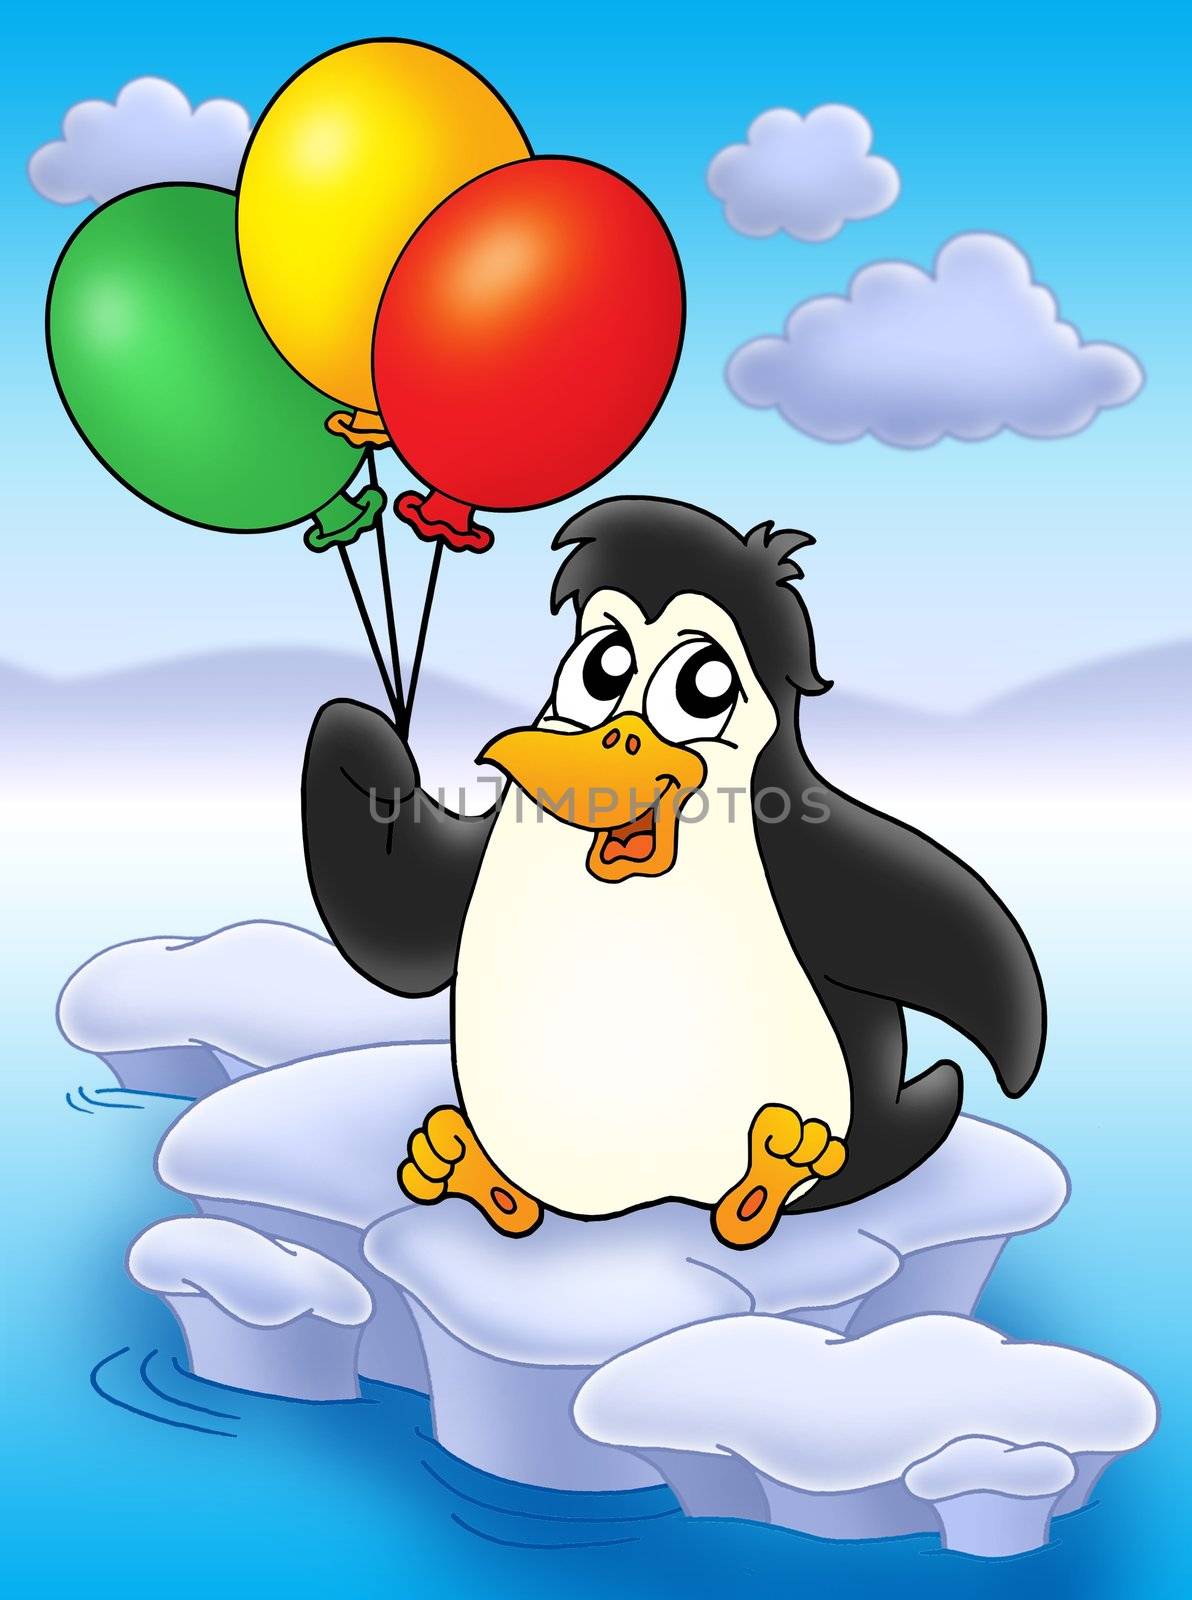 Penguin with balloons on iceberg - color illustration.